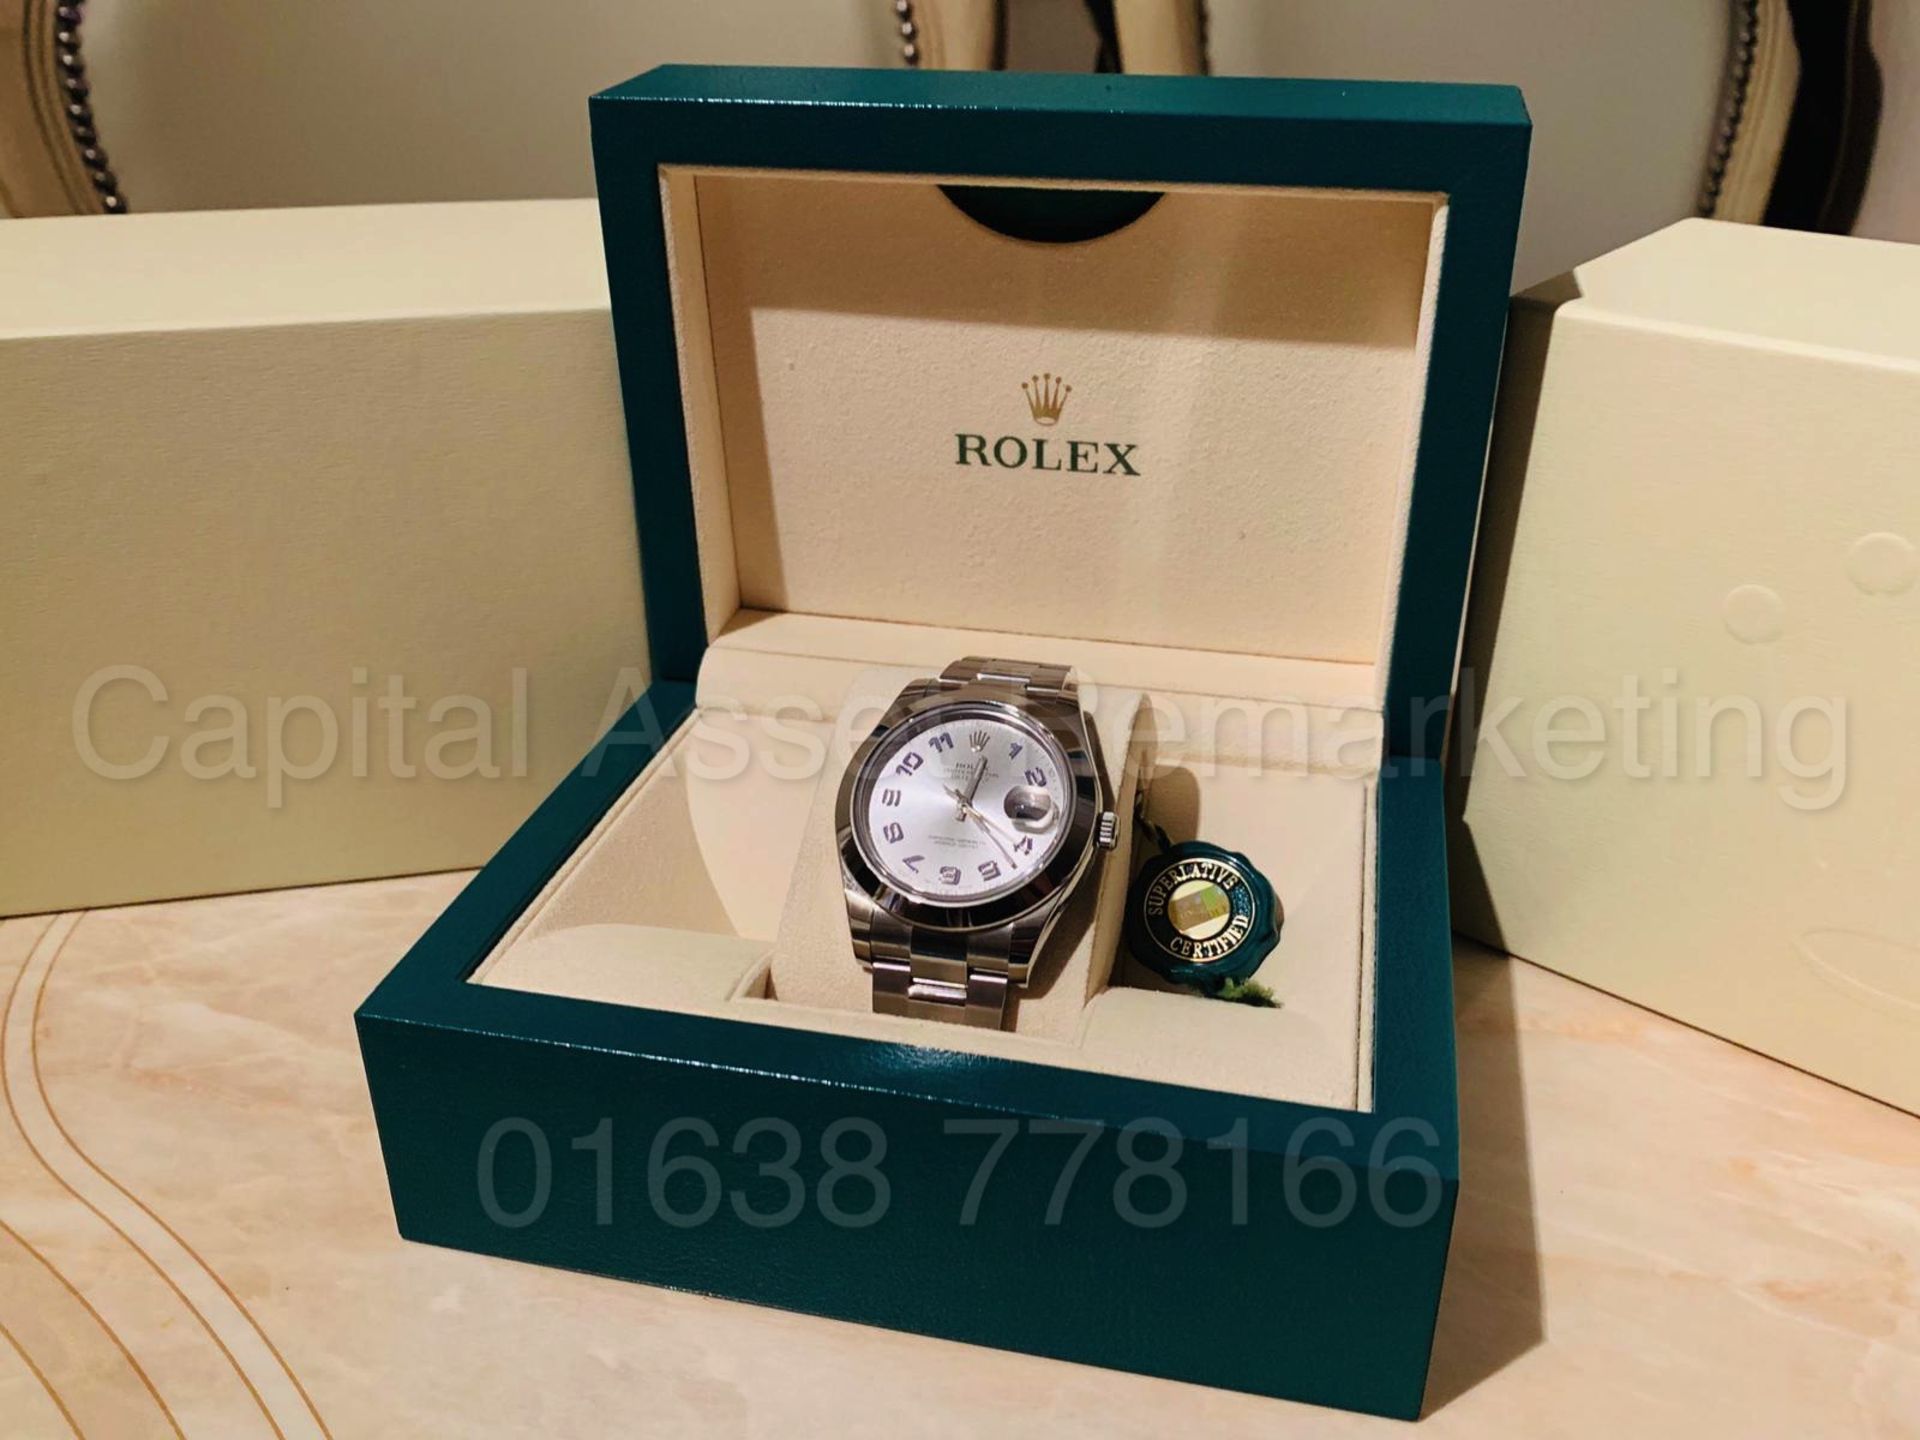 ROLEX OYSTER PERPETUAL *41MM DATEJUST* (BRAND NEW / UN-WORN) *GENUINE* (ALL PAPERWORK & BOX PRESENT) - Image 9 of 10